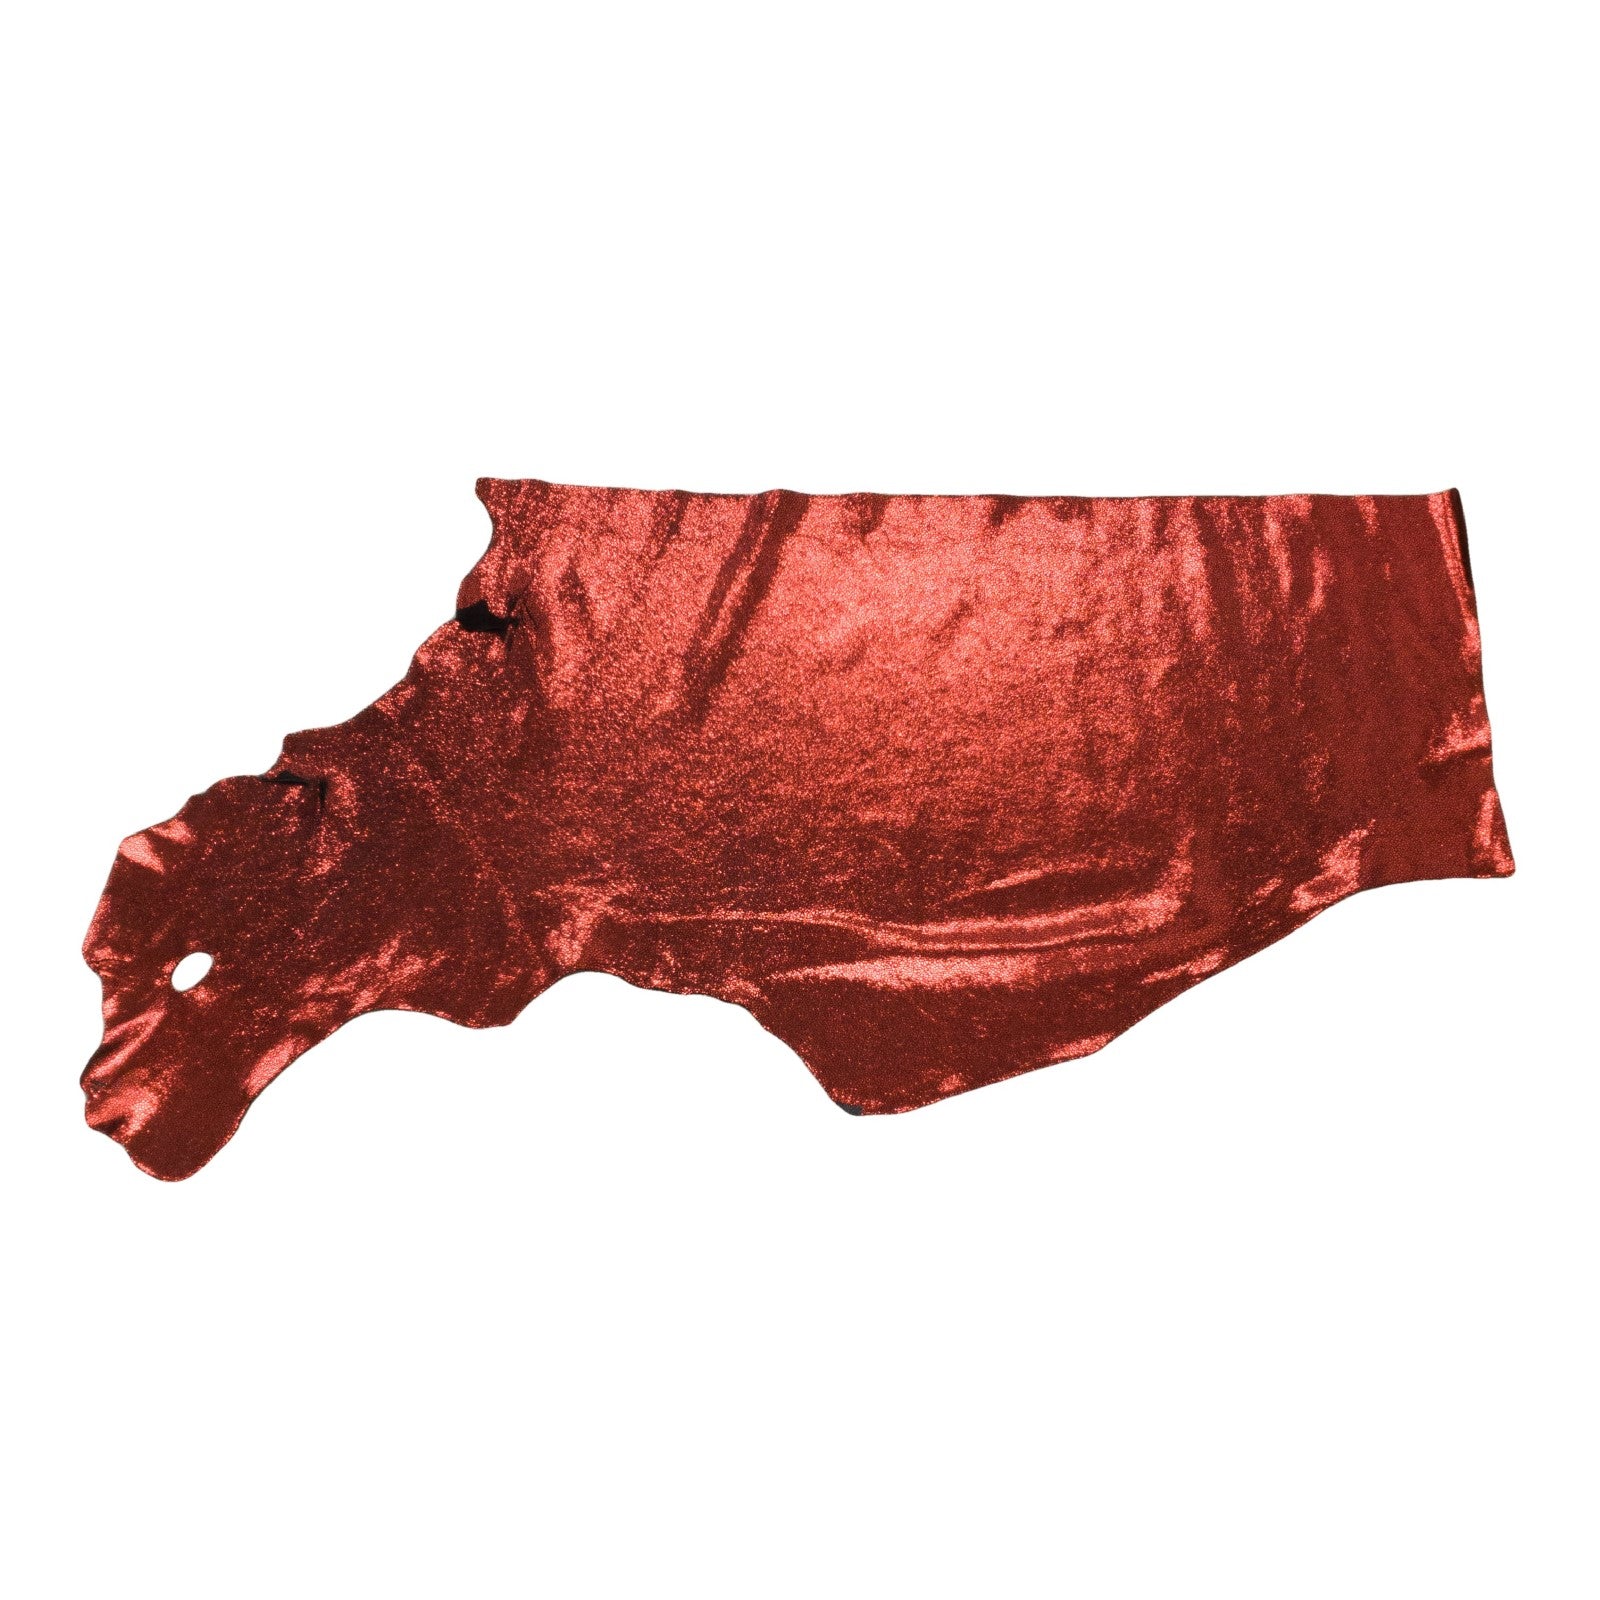 Metallic Red Sizzling Stingray 2-3 oz Cow Hides, 6.5-7.5 Sq Ft / Project Piece (Bottom) | The Leather Guy